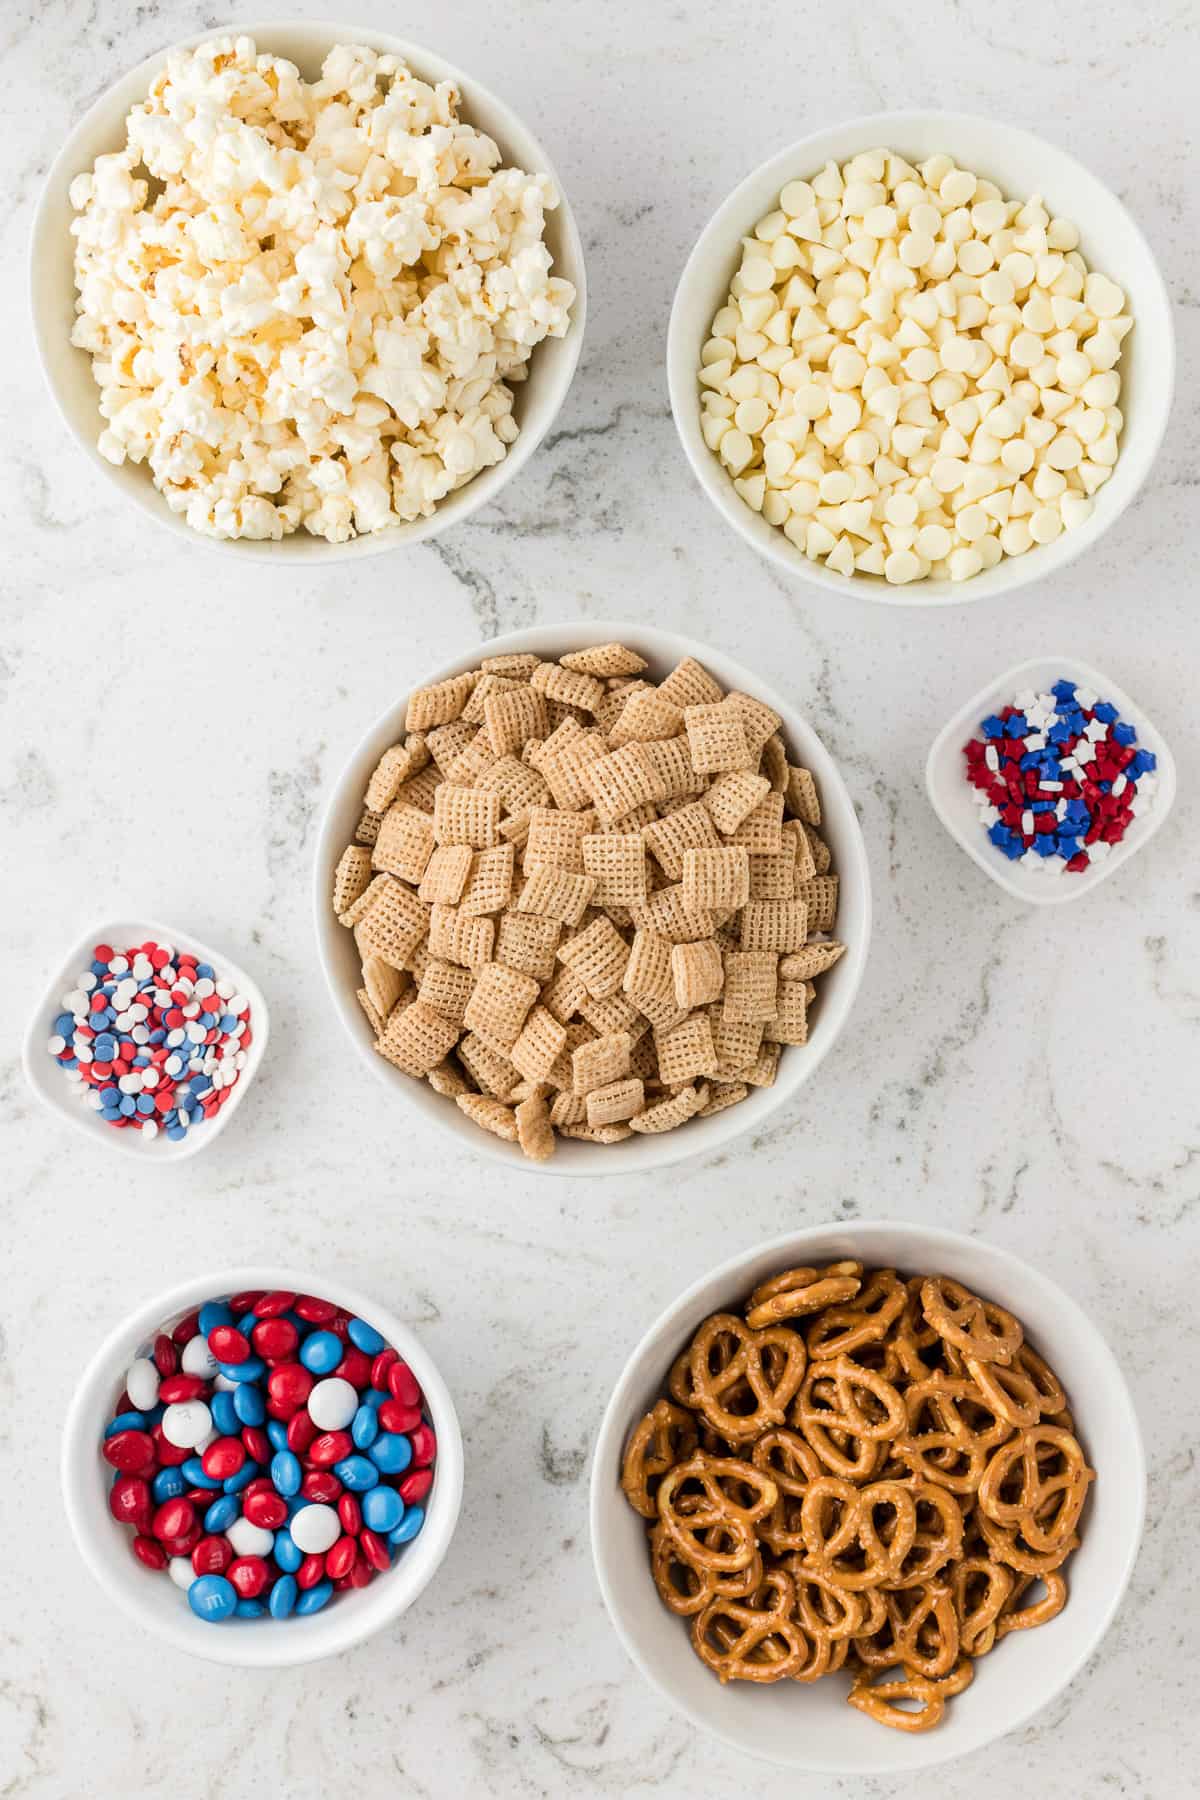 Red, White, and Blue Snack Mix